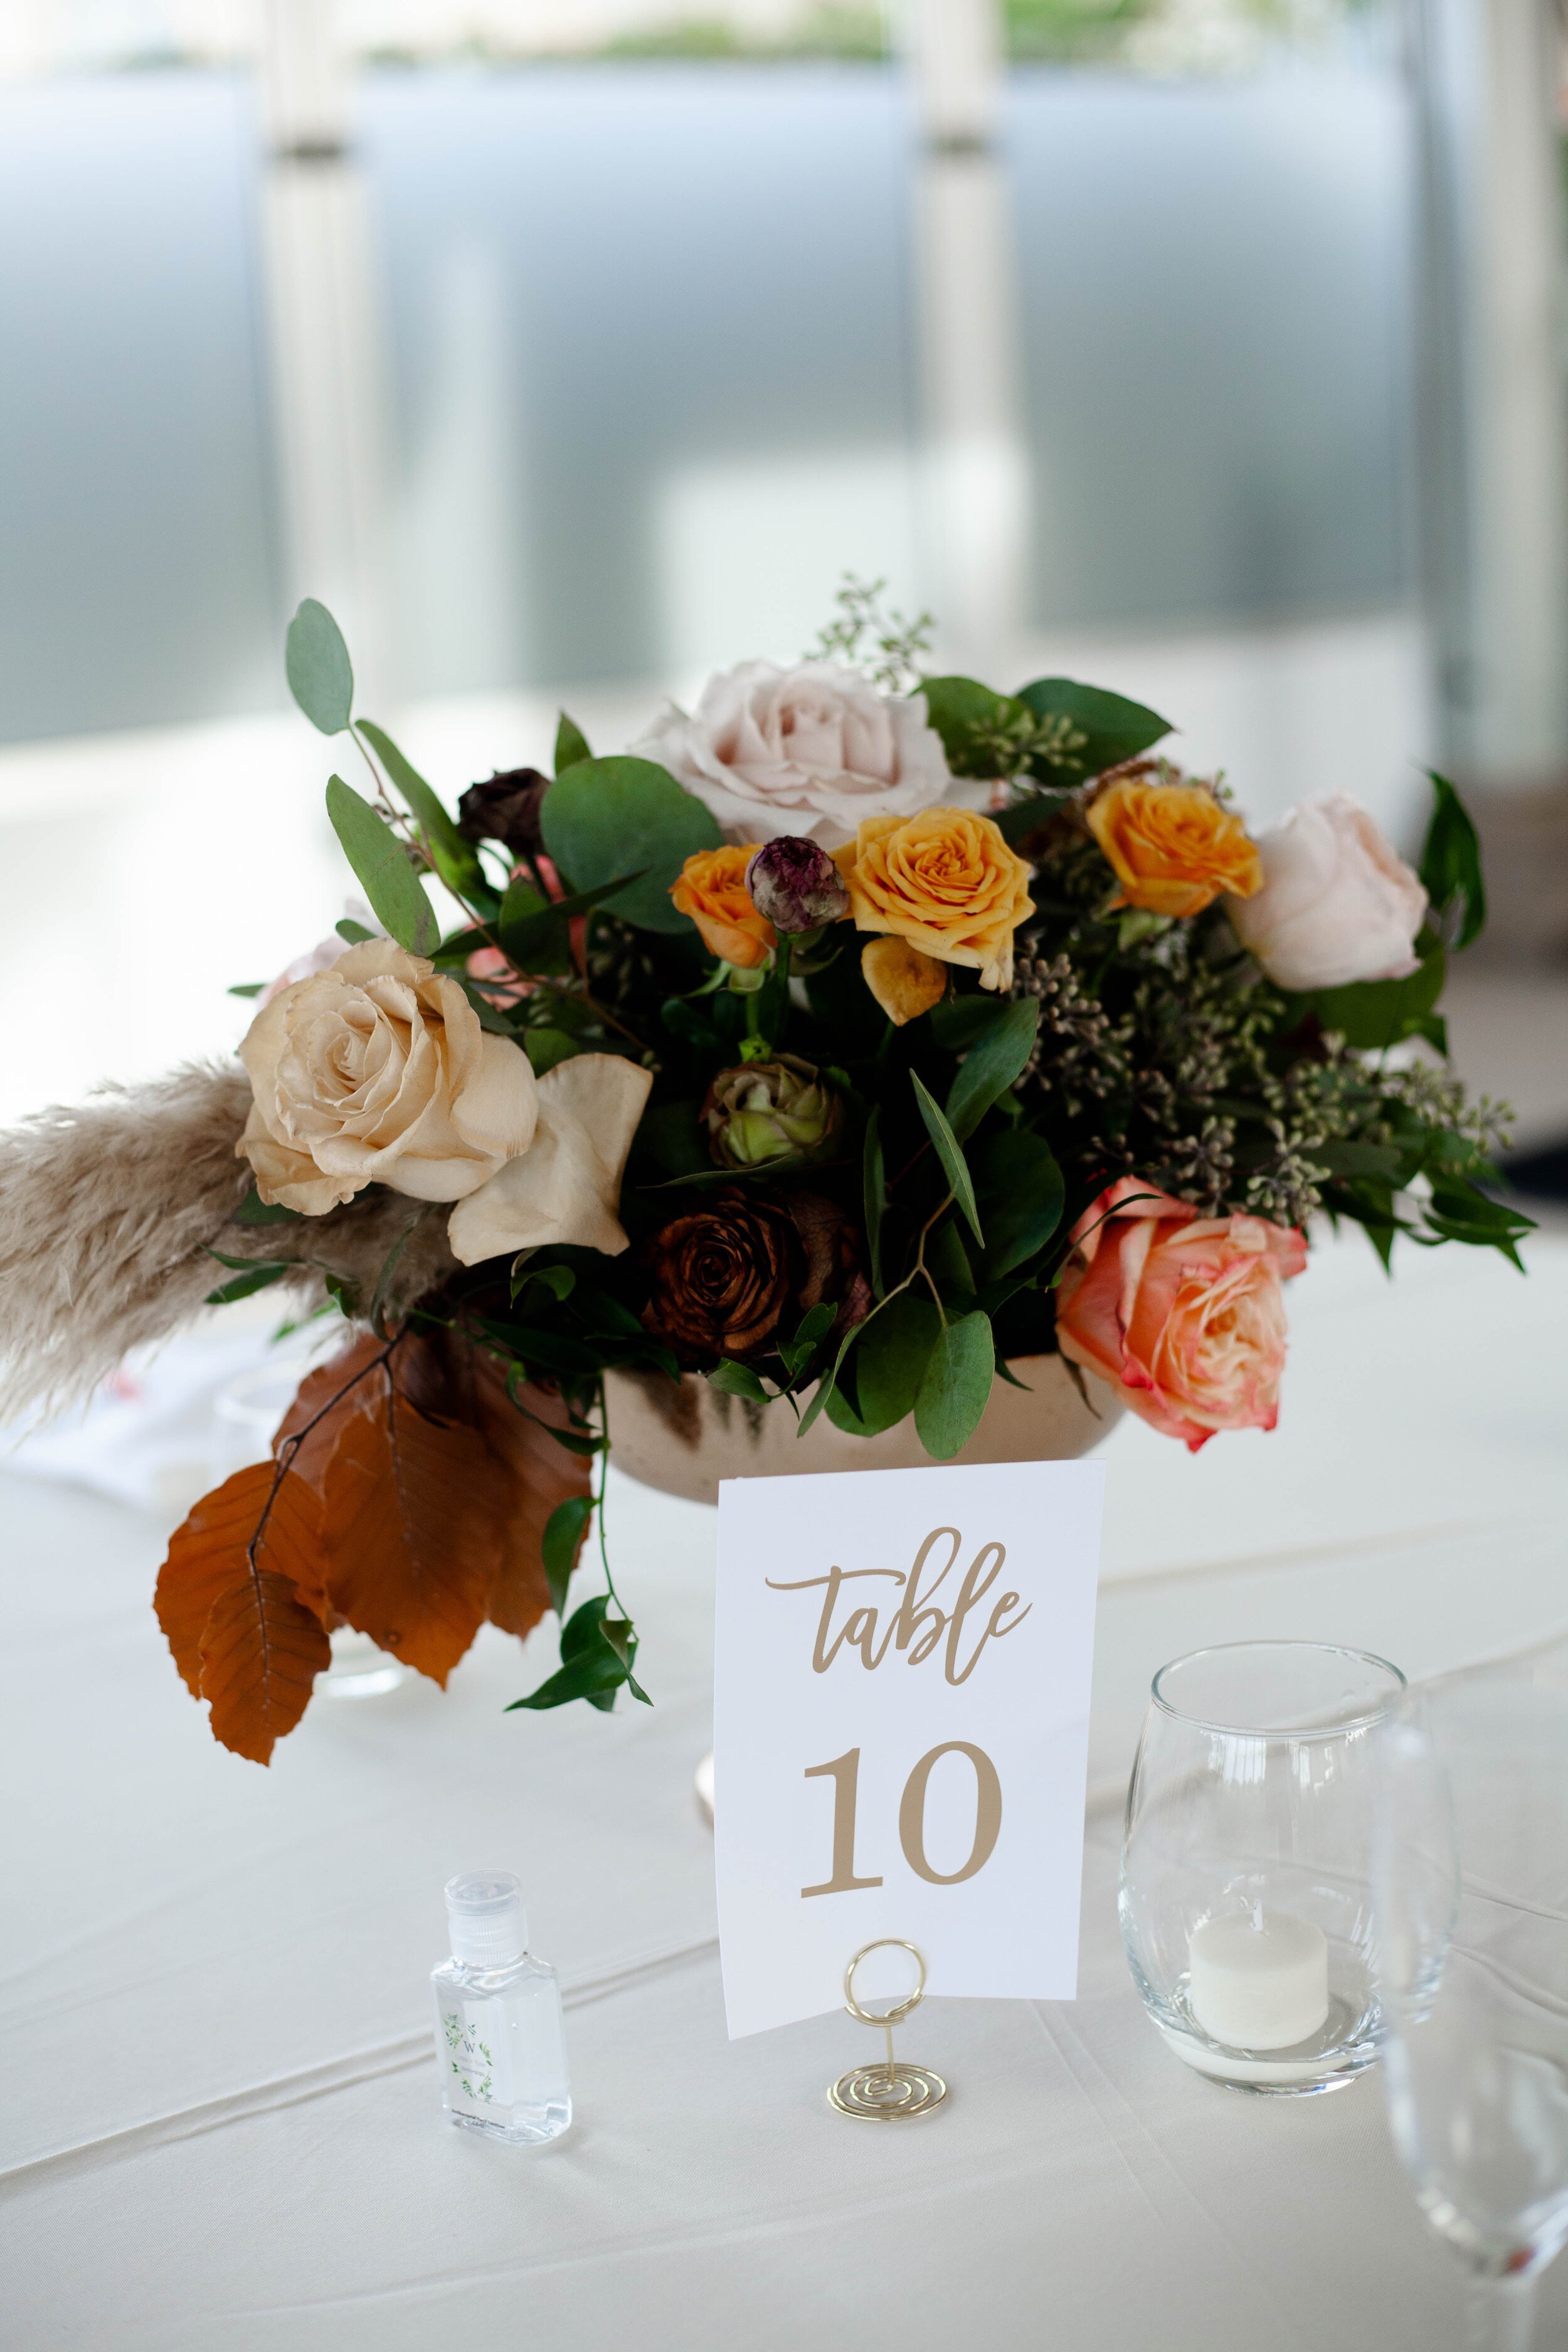 ivory-and-beau-wedding-and-florals-lydia-and-tyler-savannah-wedding-flowers-florals-savannah-florist-wedding-coordinator-georgia-florist-wedding-florist-wedding-inspo-inspiration-wedding-blog_MG_4704.jpg